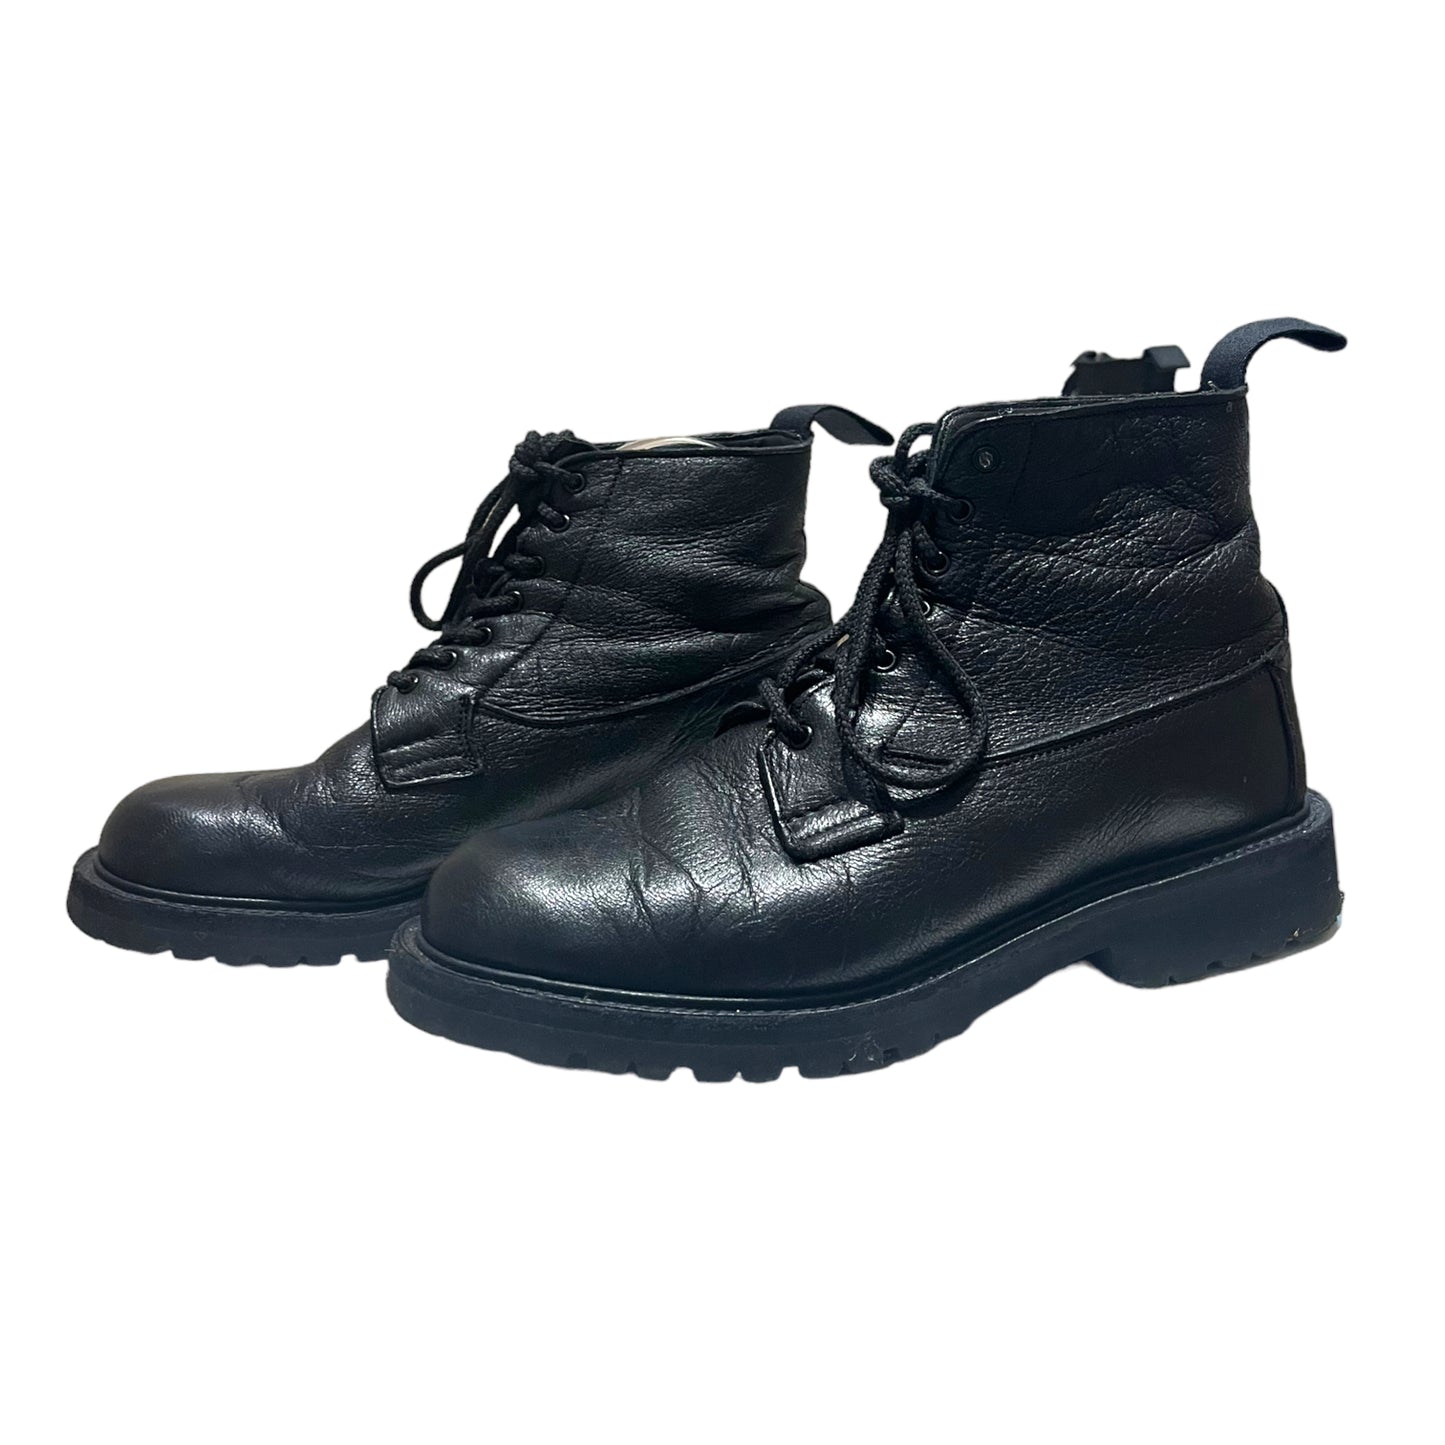 Tricker's Black Handmade Lace Up Boots